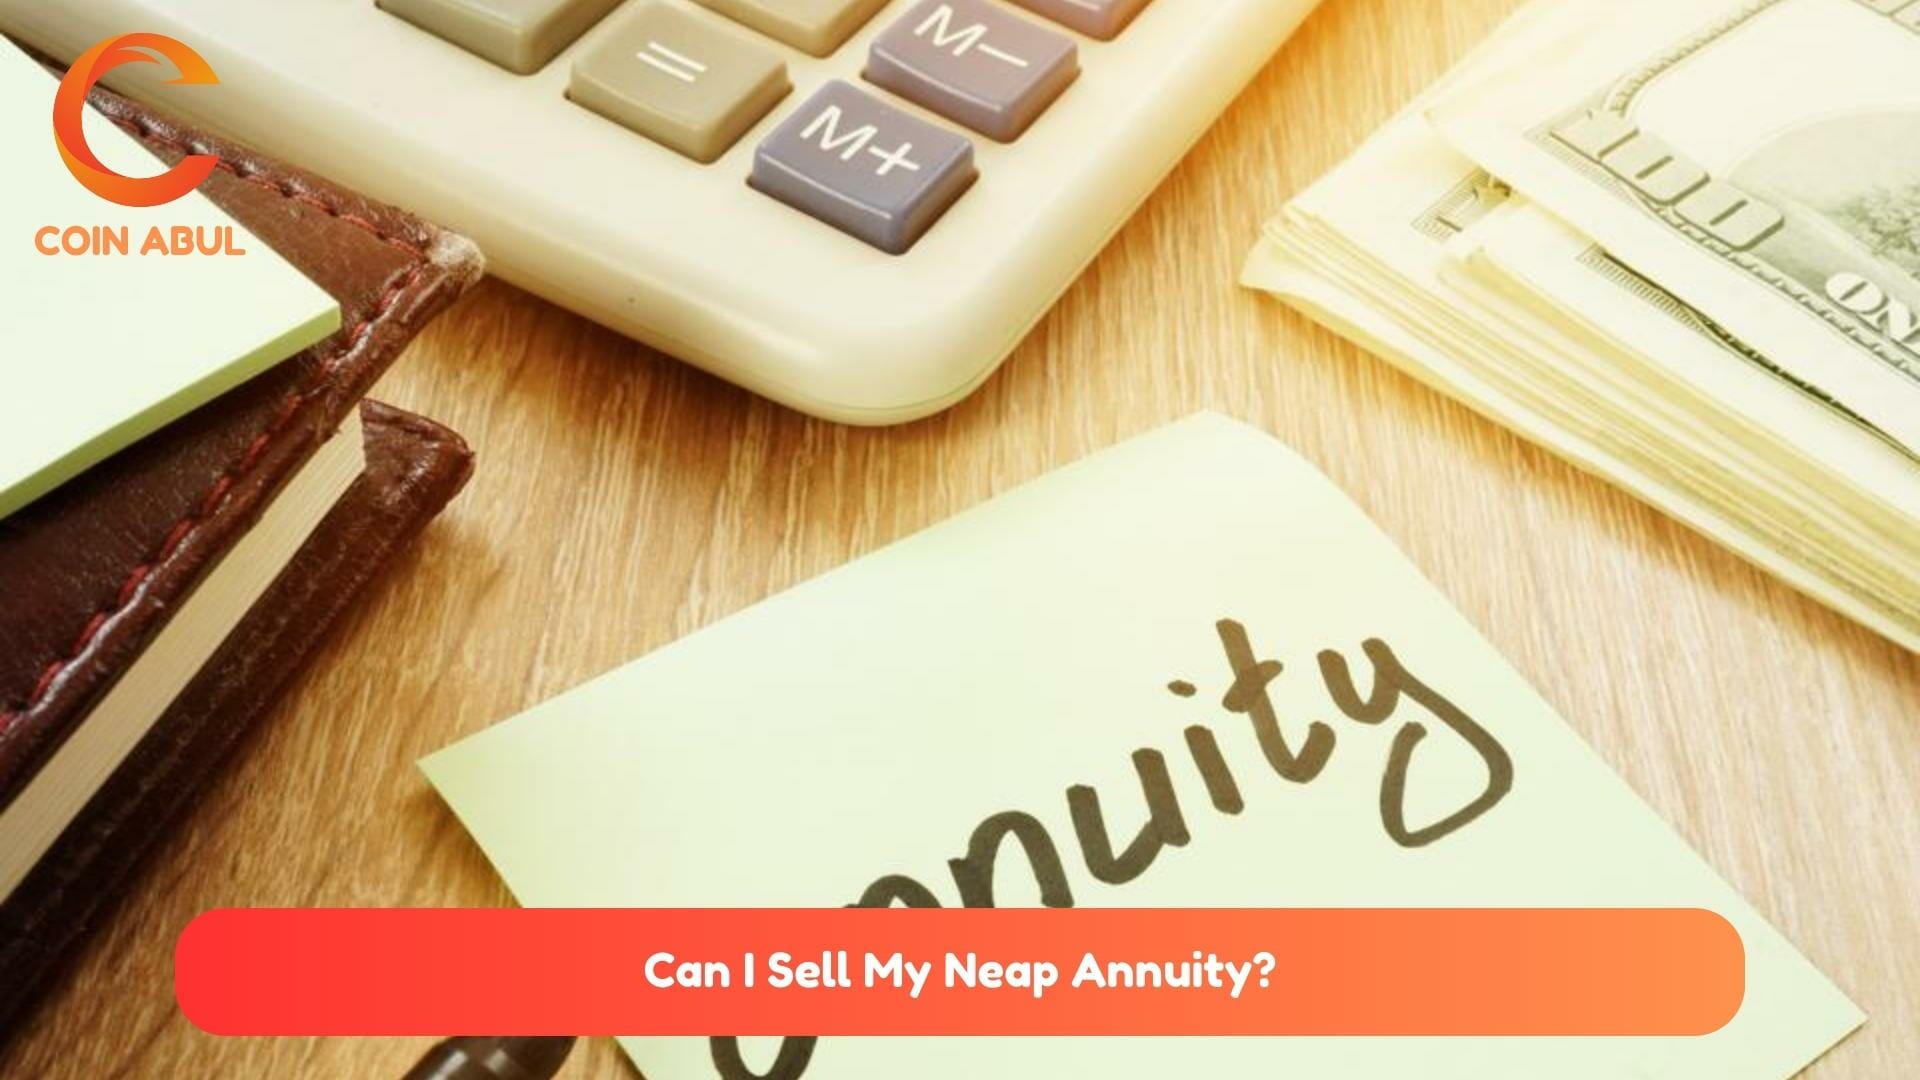 Can I Sell My Neap Annuity